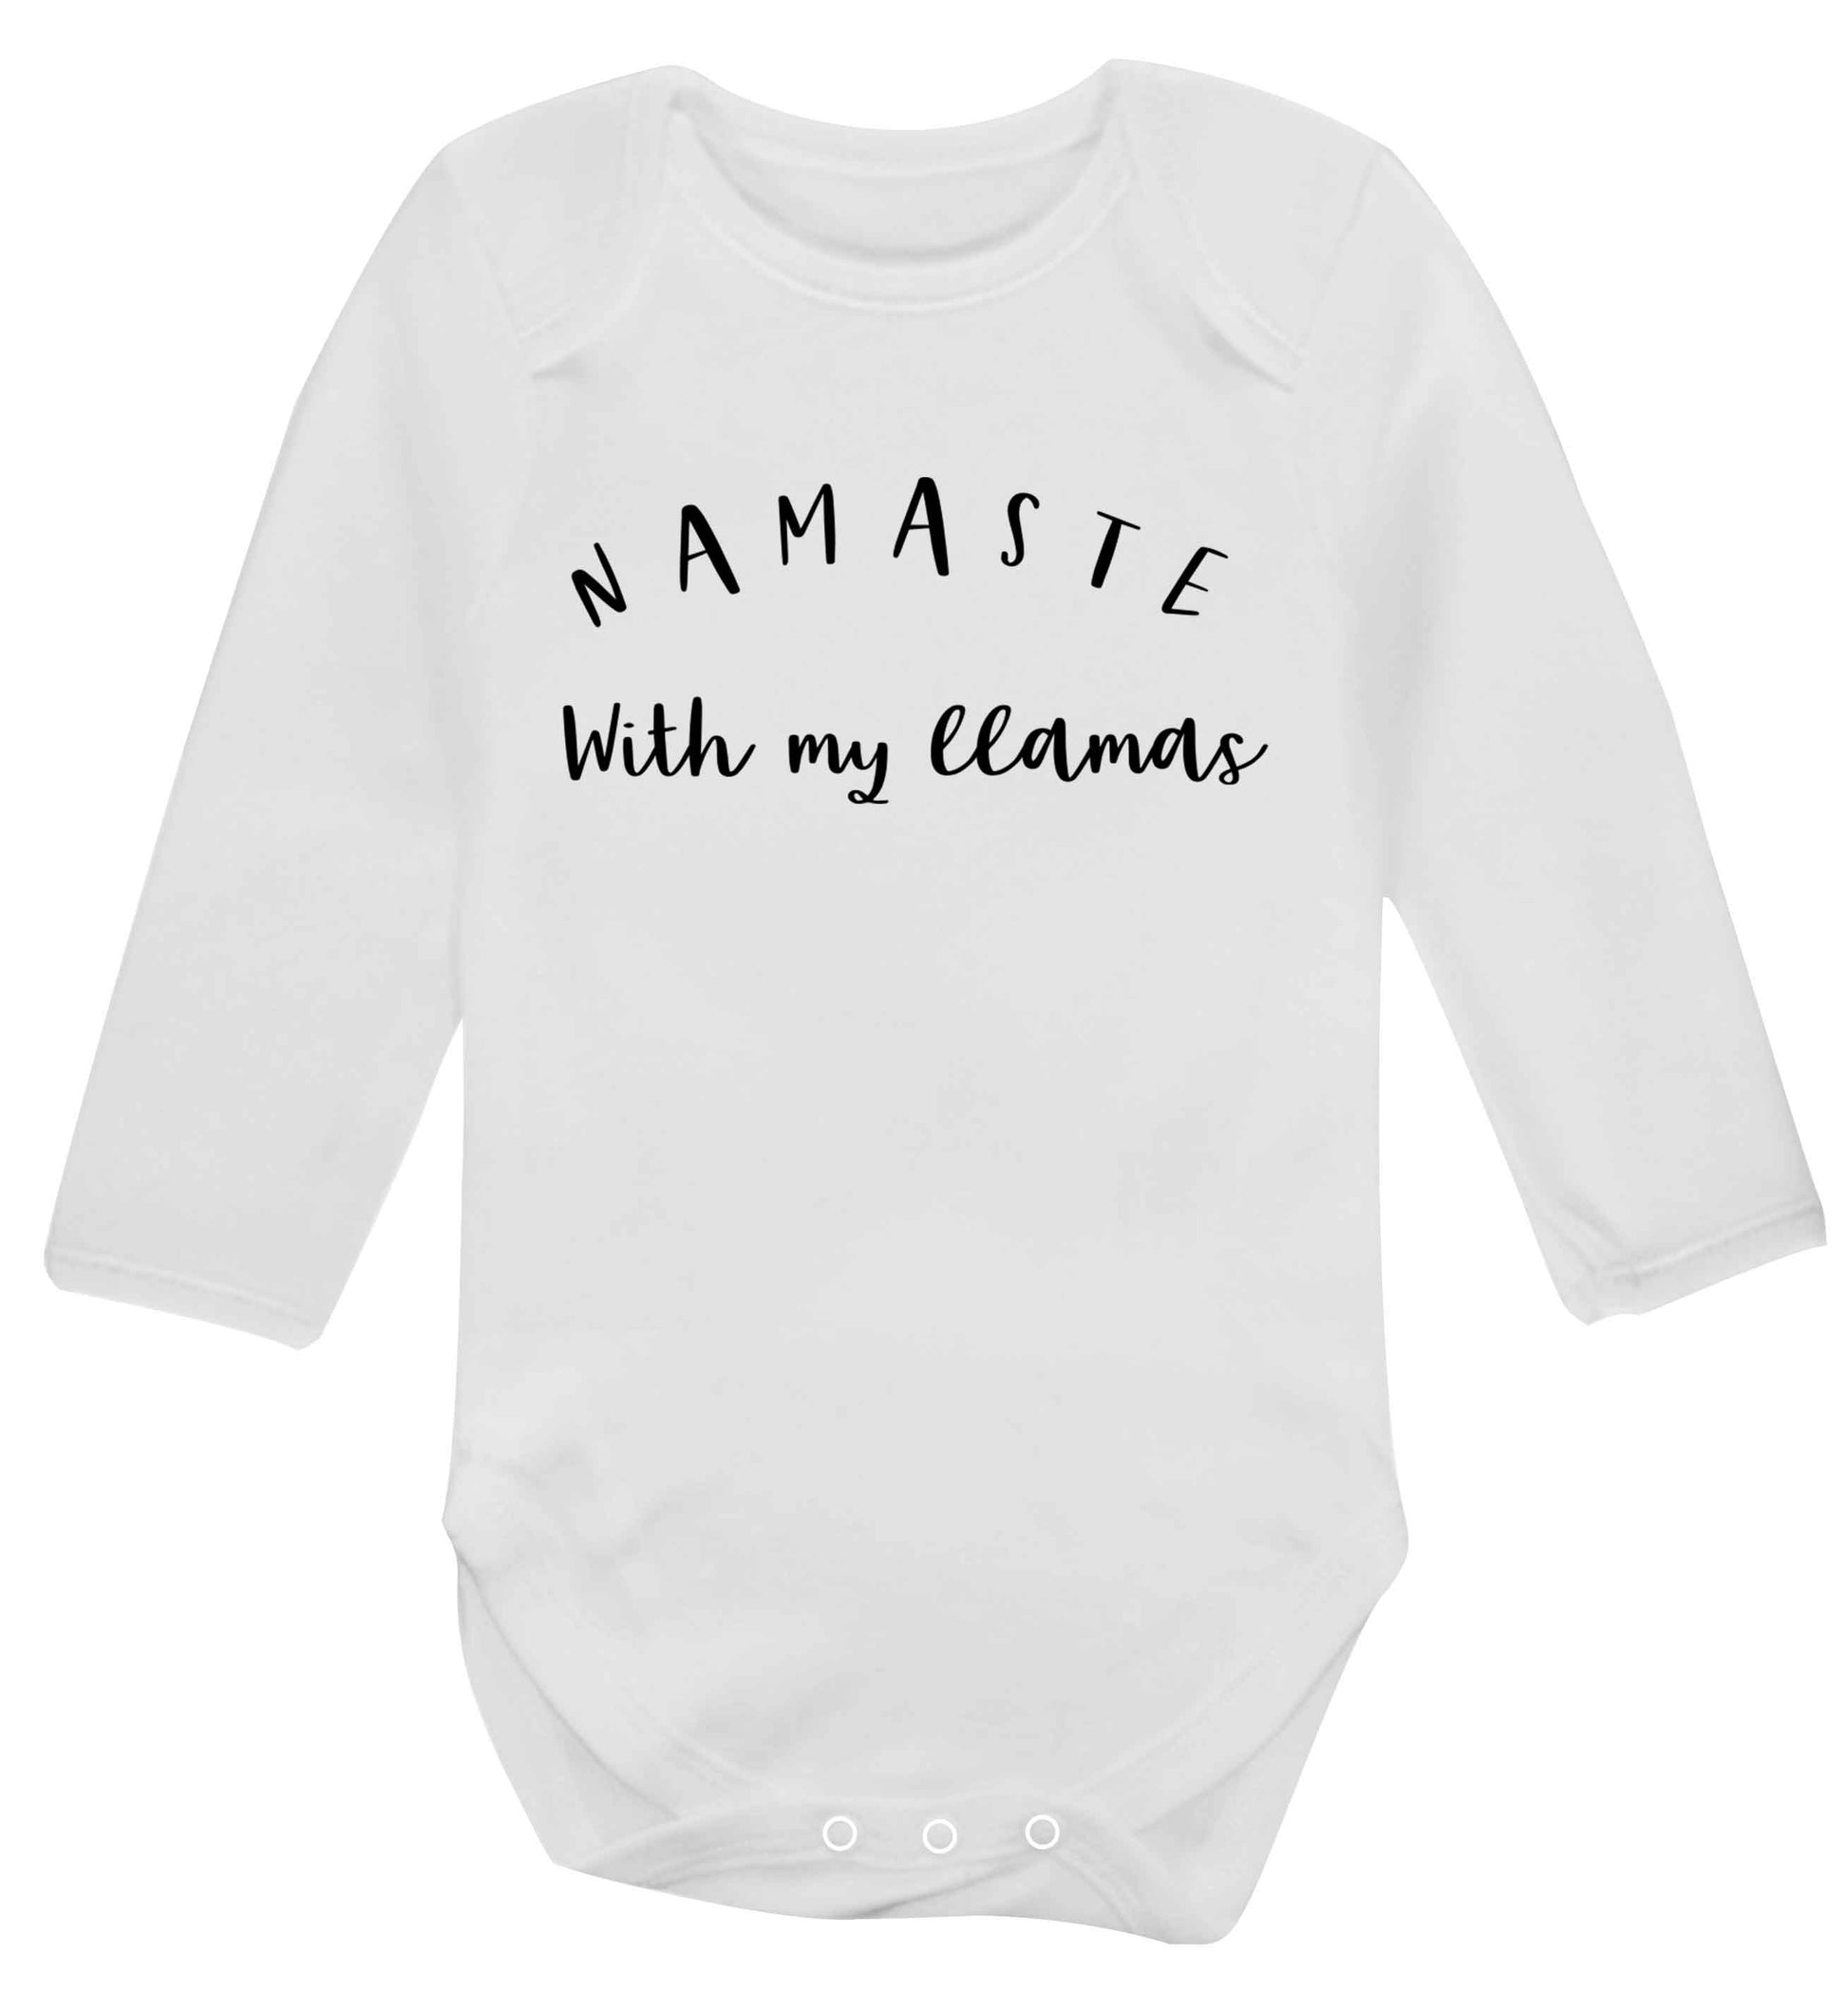 Namaste with my llamas Baby Vest long sleeved white 6-12 months